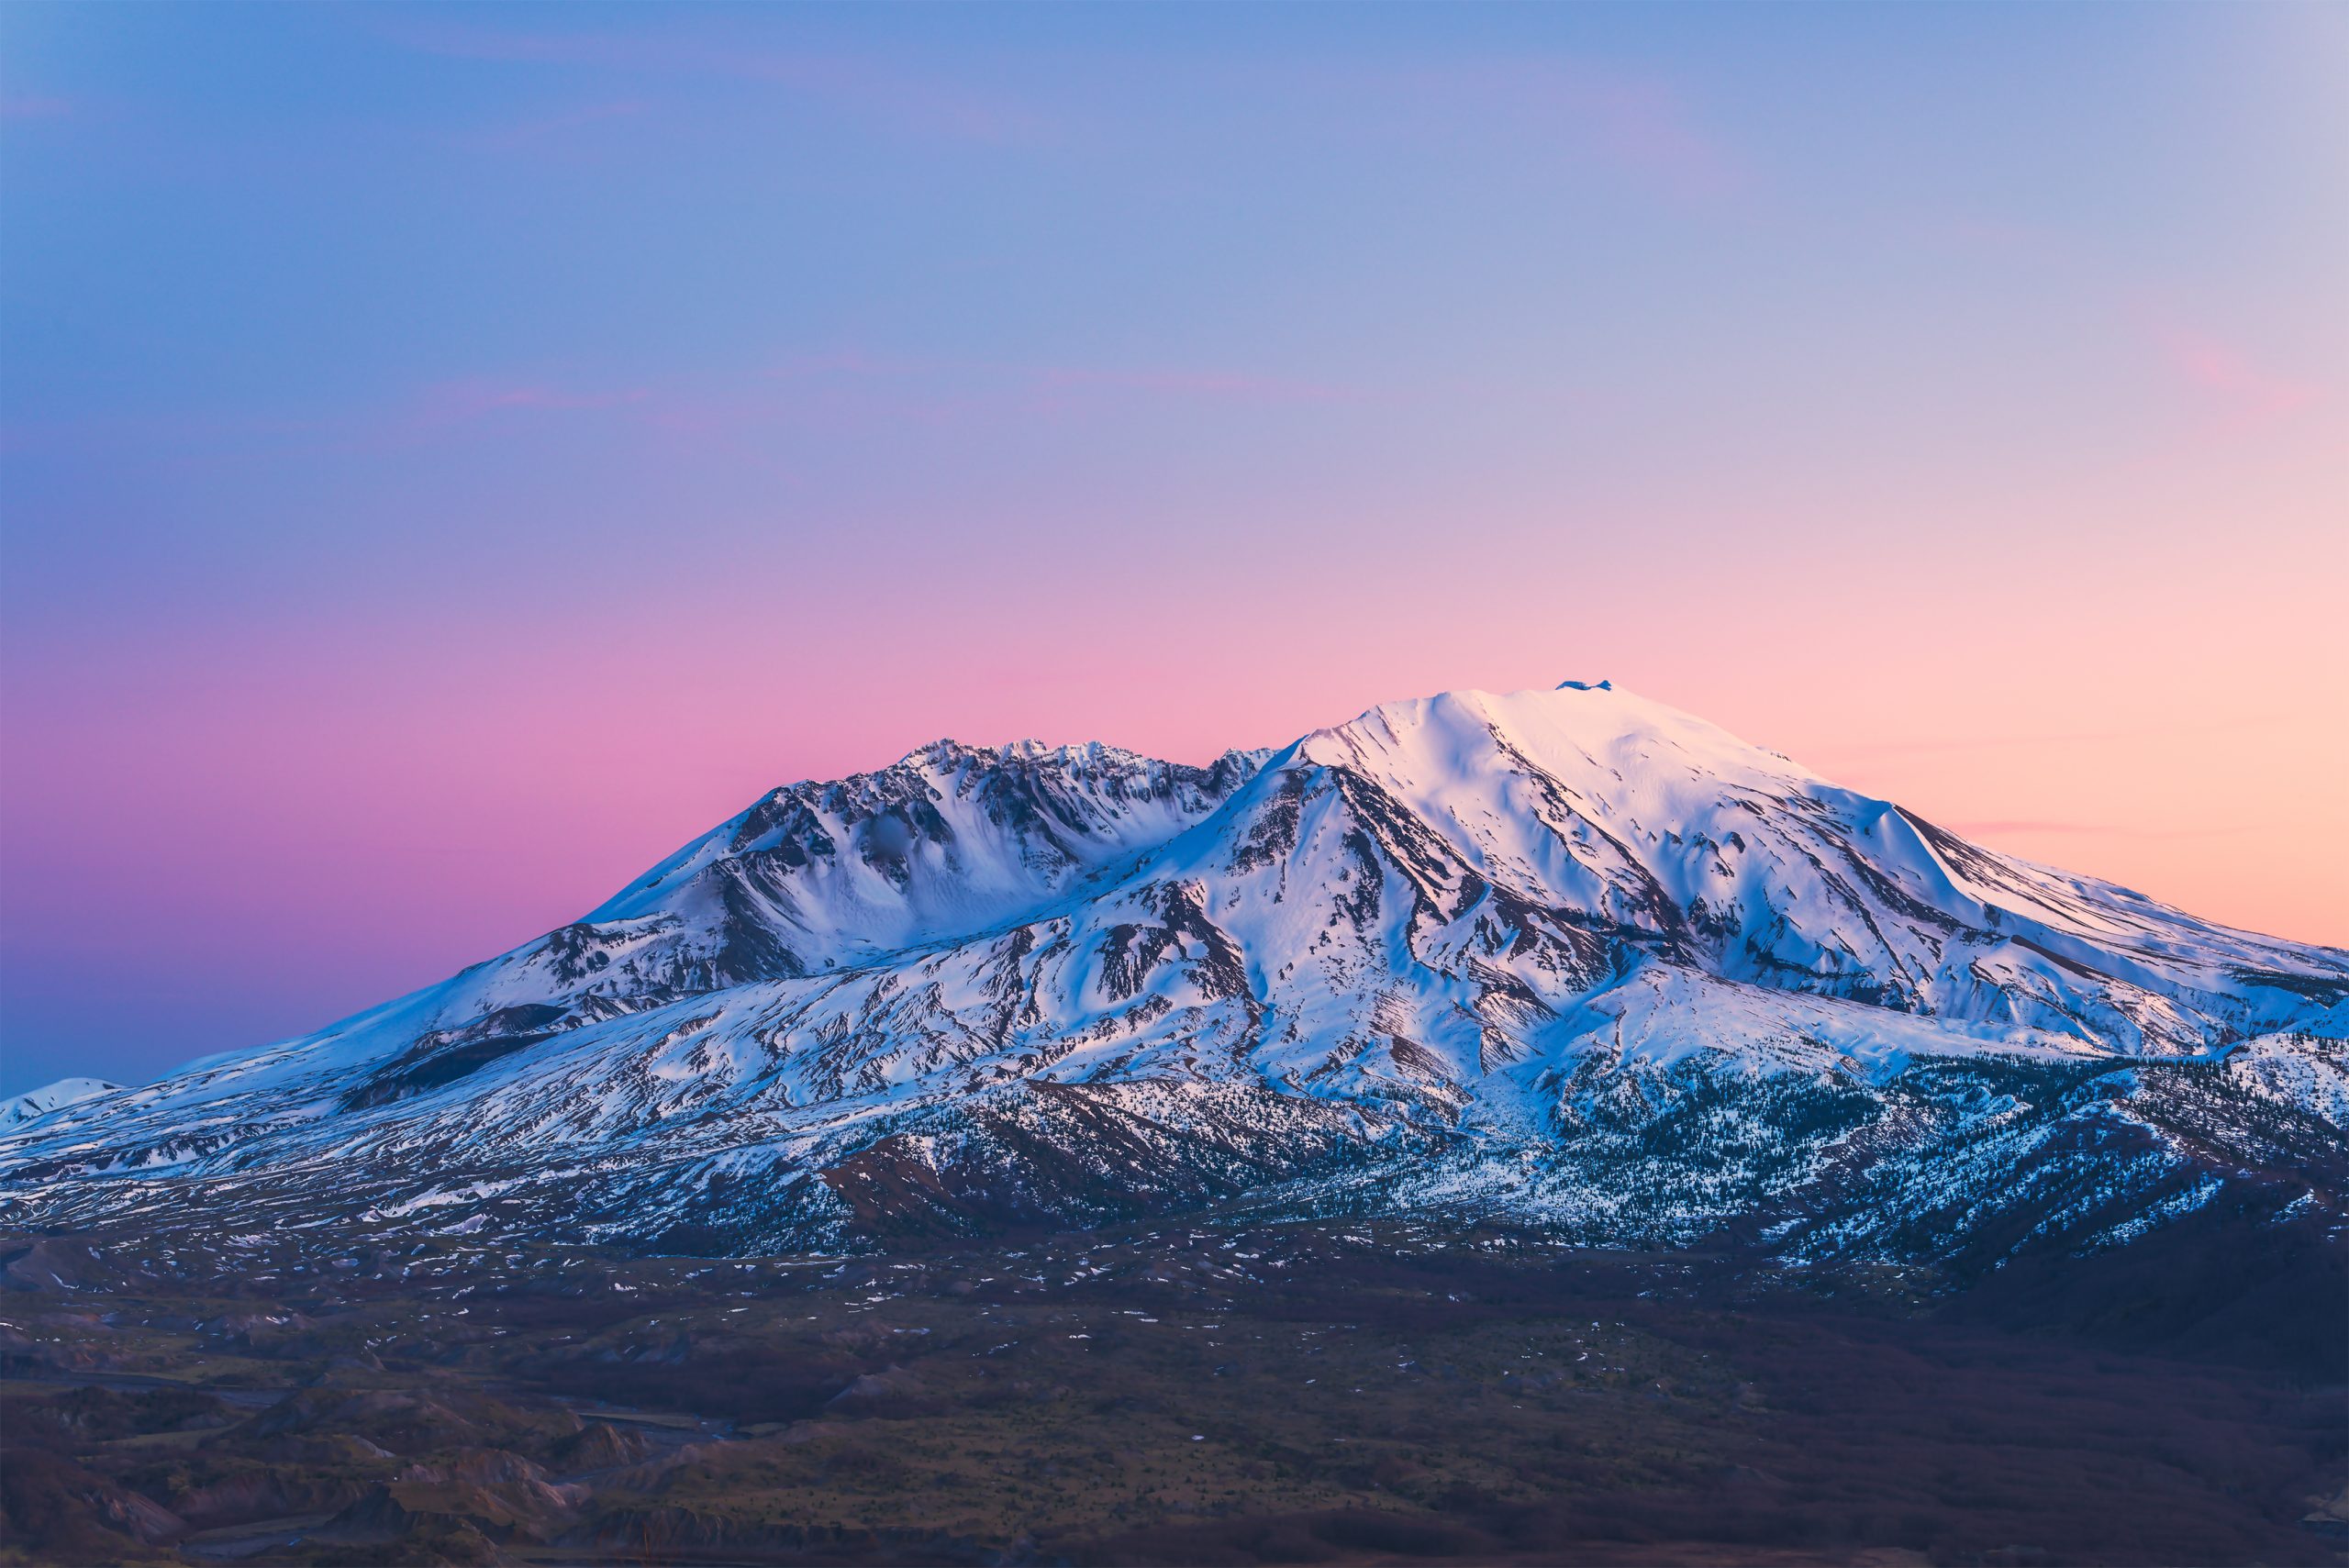 Mount Saint Helens covered in snow